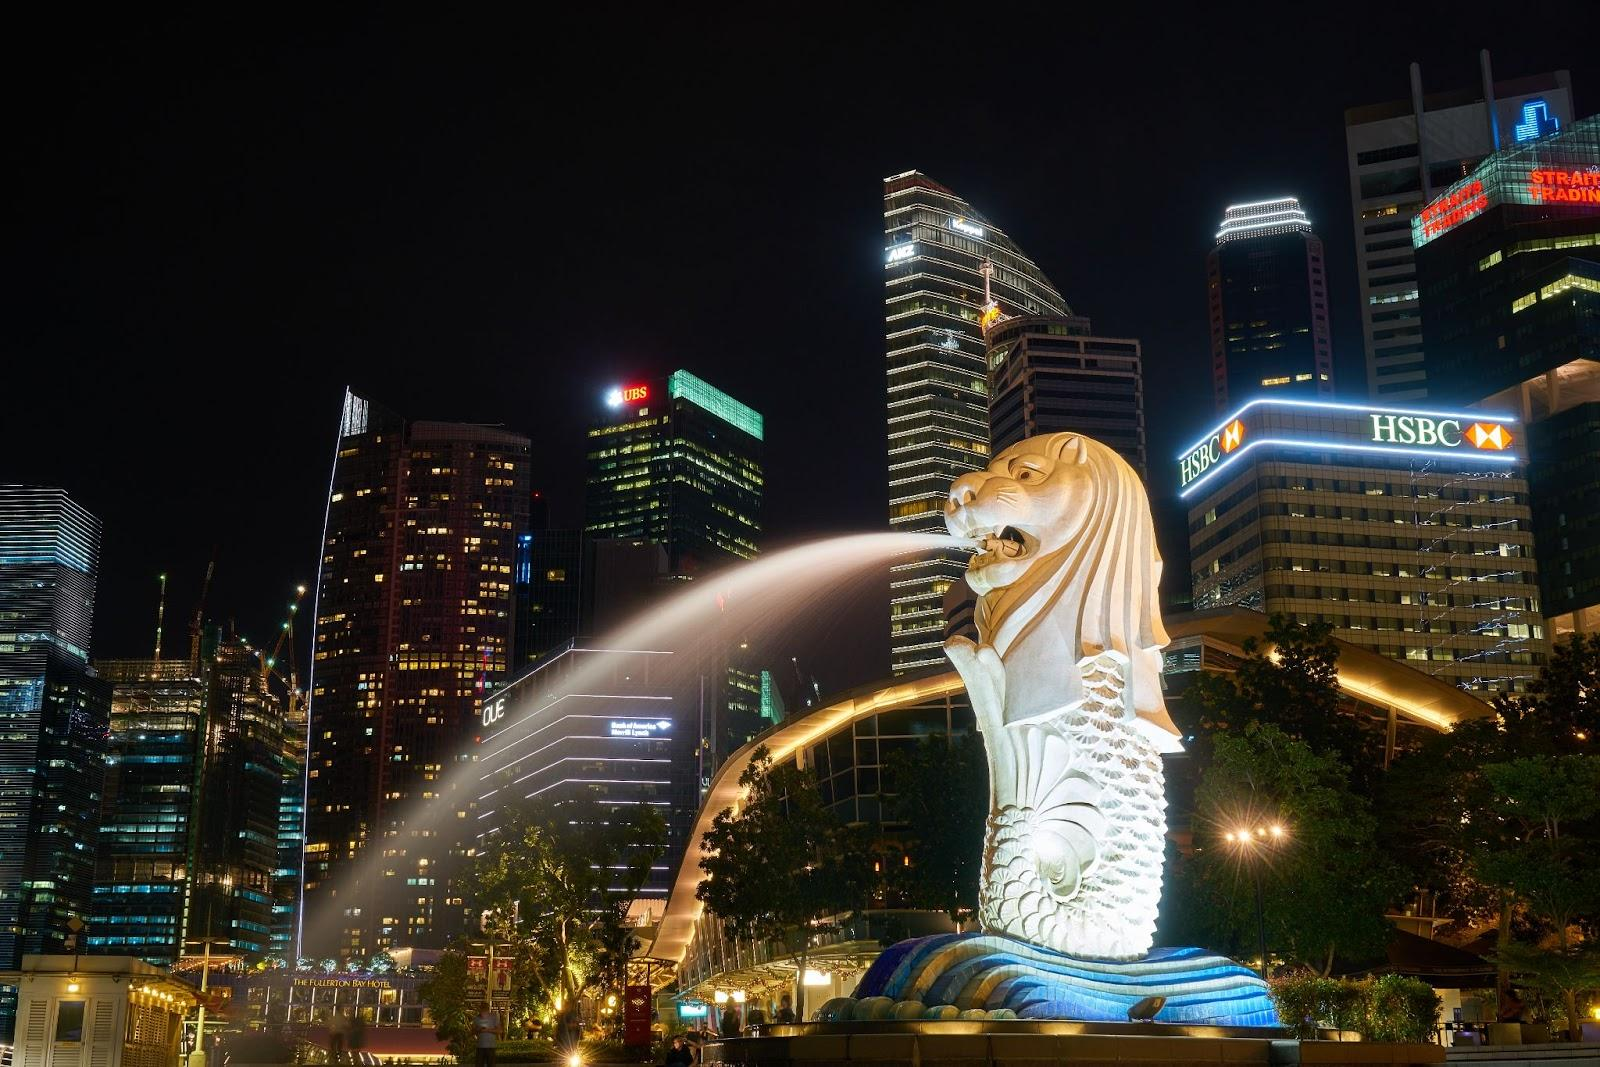 Singapore merlion park at night city lights tall buildings